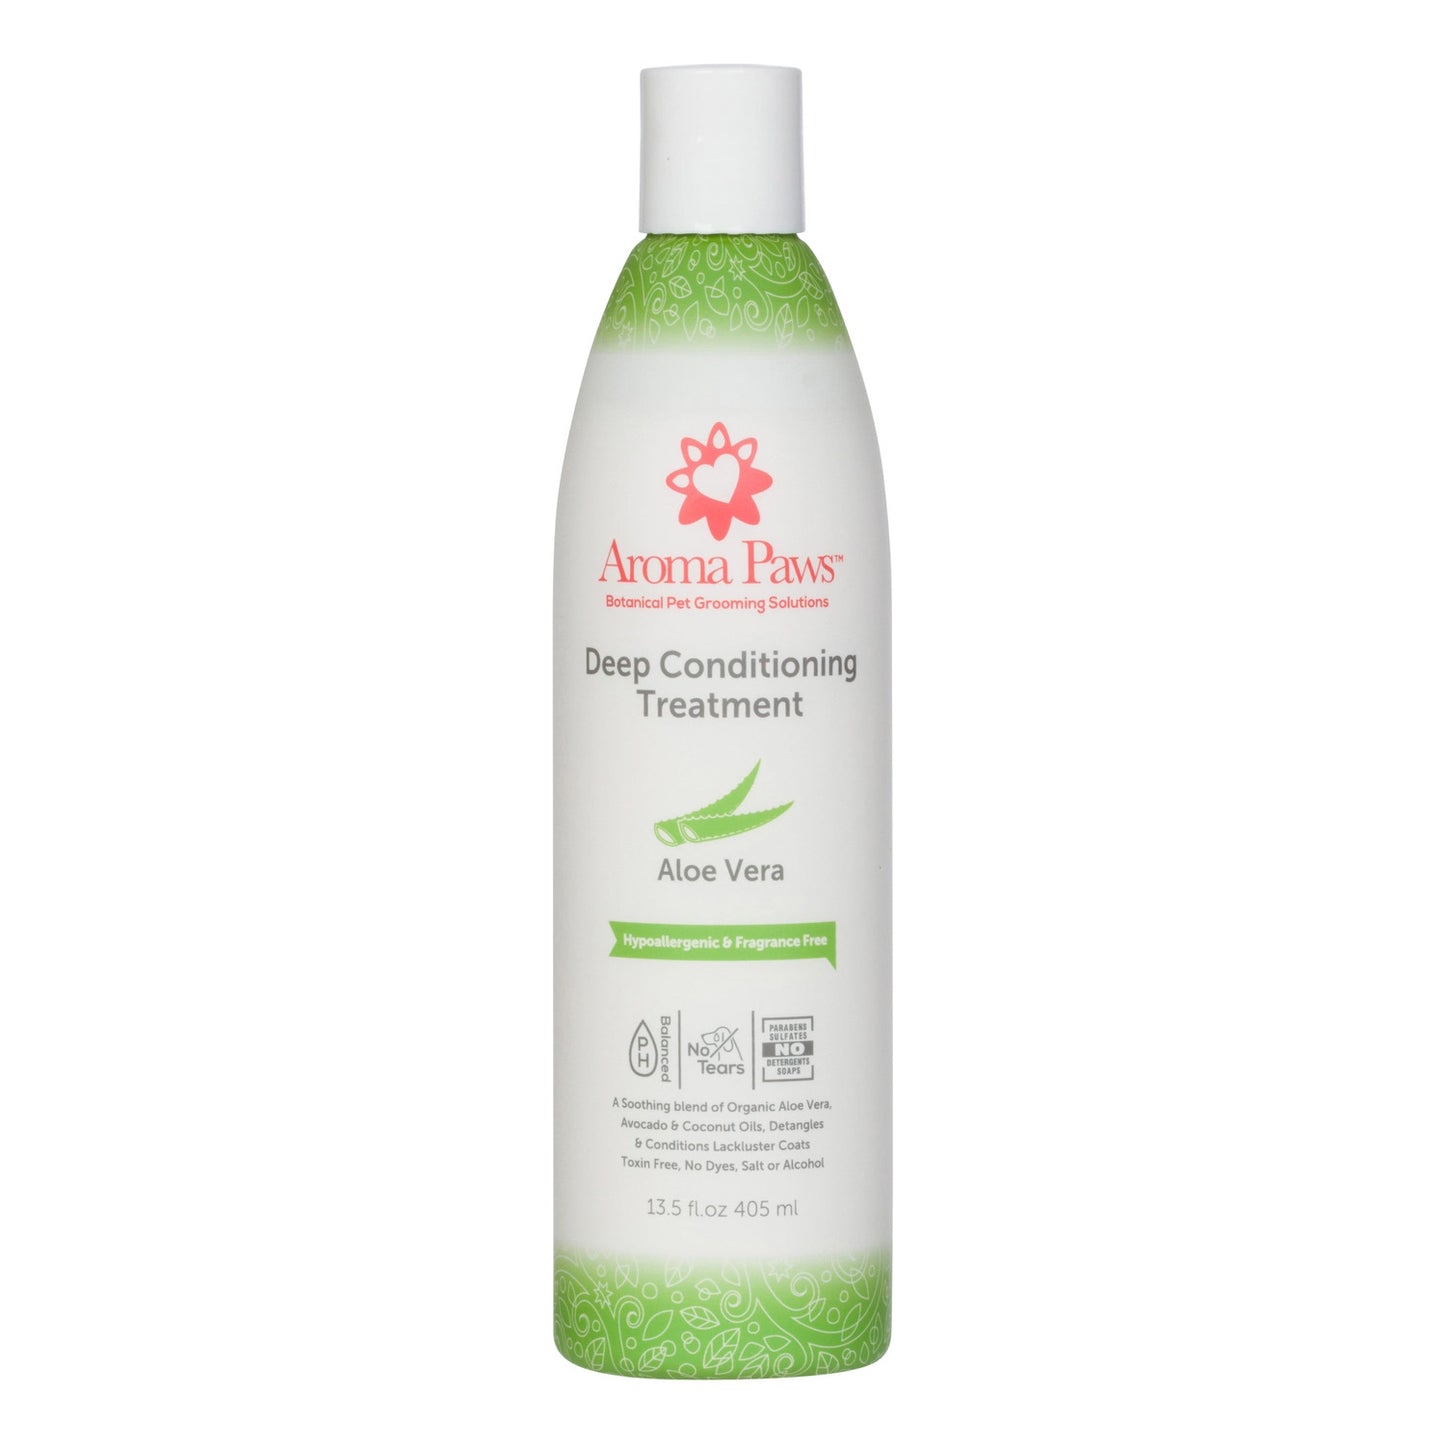 Aroma Paws Deep Conditioning Treatment 13.5 oz.